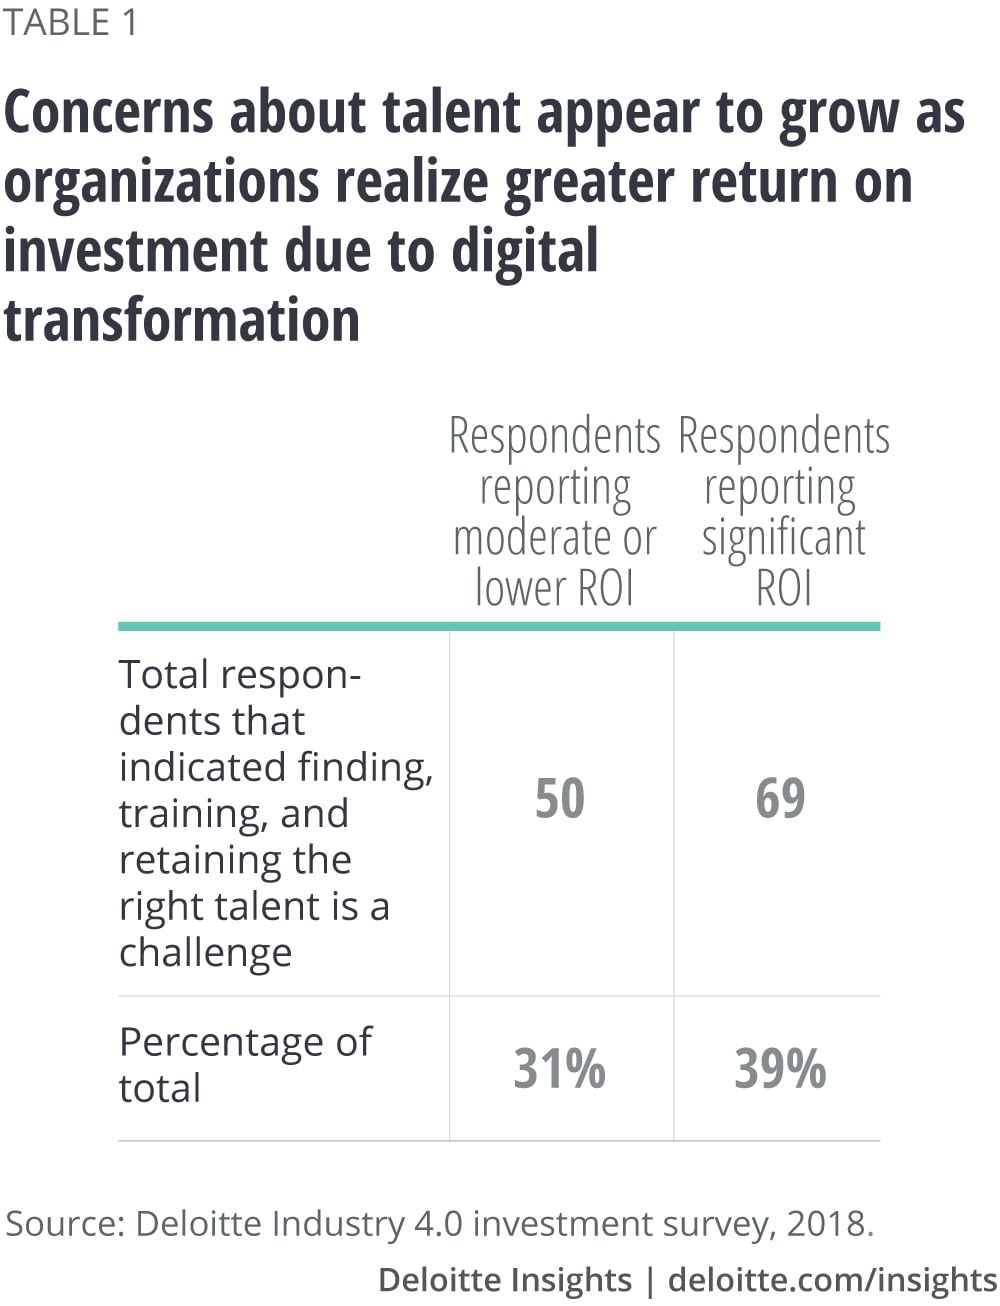 Concerns about talent appear to grow as organizations realize greater return on investment due to digital